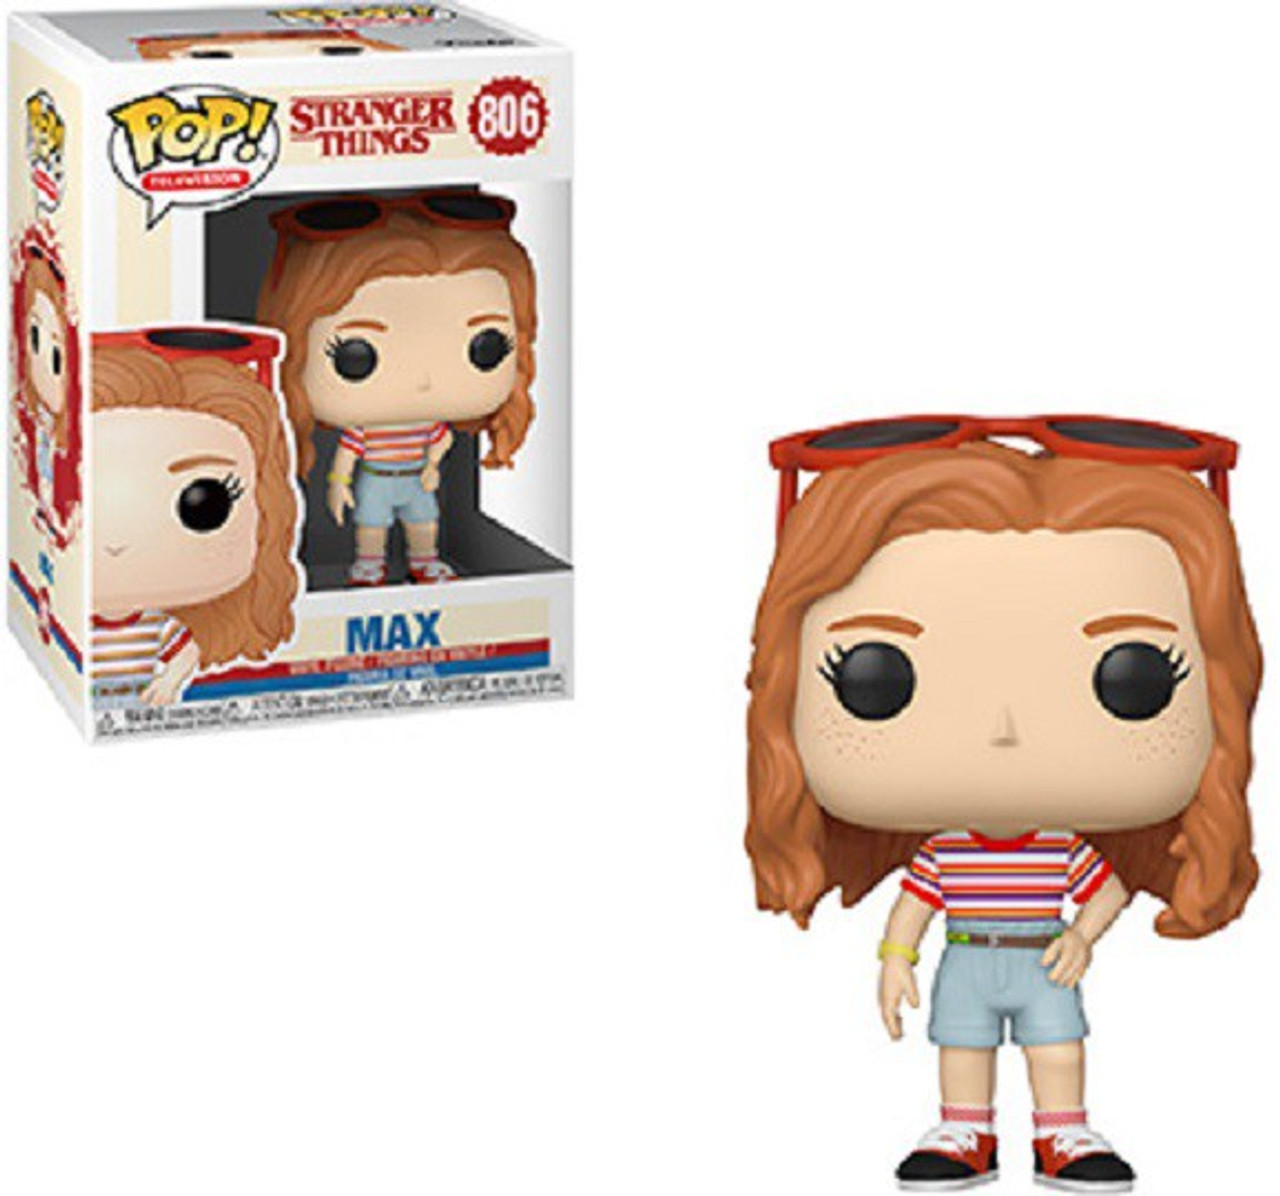 funko official website